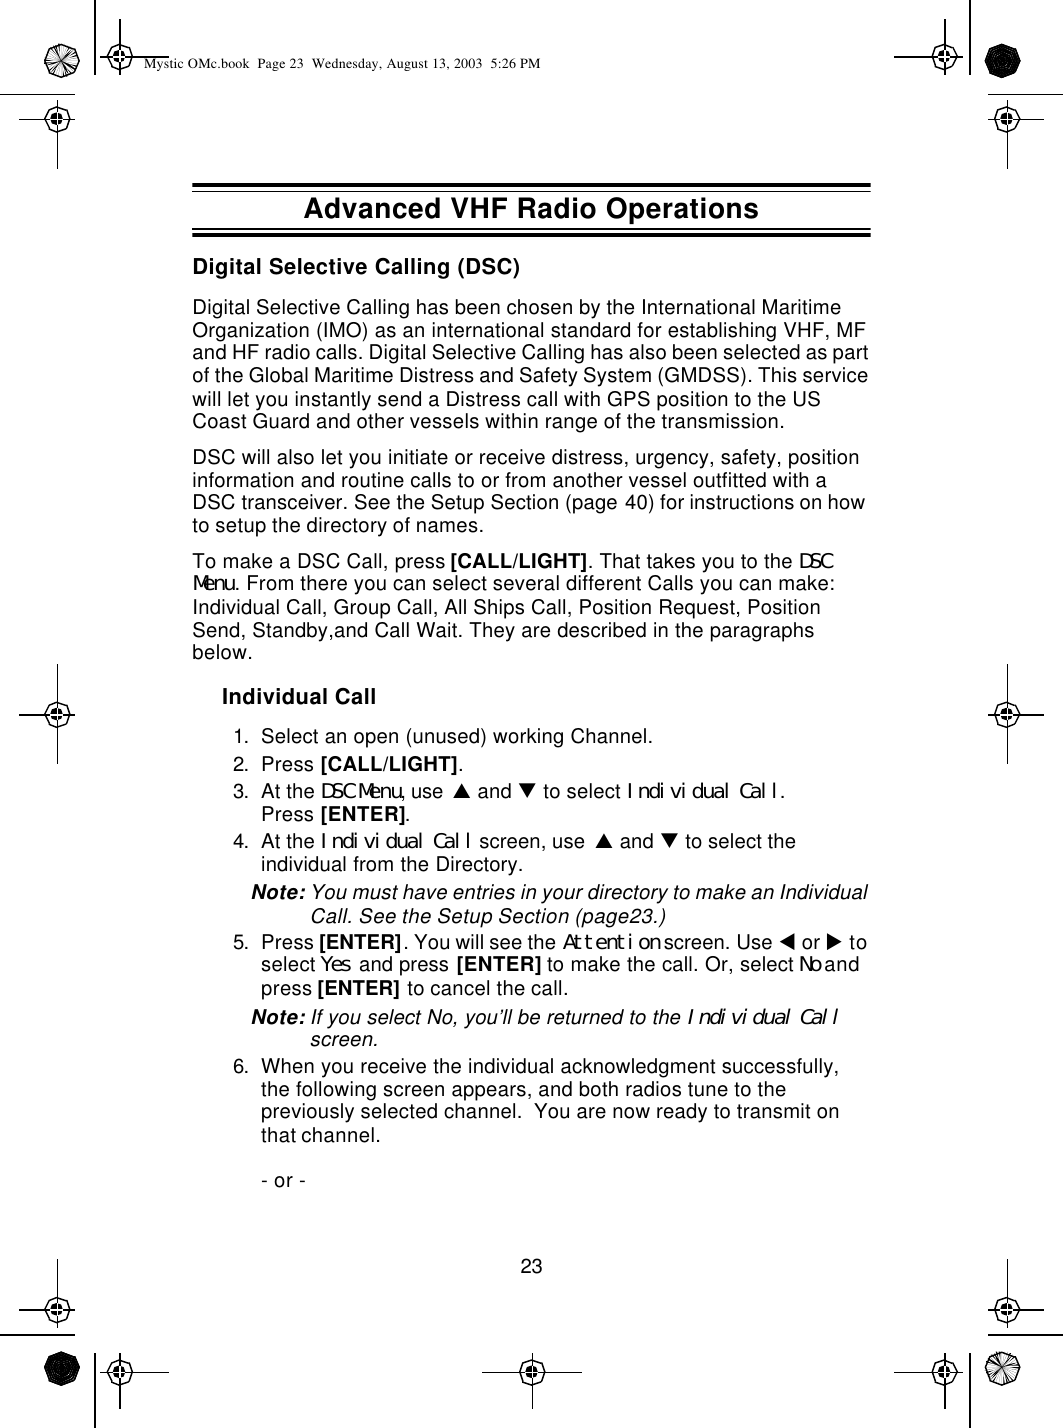 23Digital Selective Calling (DSC)Digital Selective Calling has been chosen by the International Maritime Organization (IMO) as an international standard for establishing VHF, MF and HF radio calls. Digital Selective Calling has also been selected as part of the Global Maritime Distress and Safety System (GMDSS). This service will let you instantly send a Distress call with GPS position to the US Coast Guard and other vessels within range of the transmission. DSC will also let you initiate or receive distress, urgency, safety, position information and routine calls to or from another vessel outfitted with a DSC transceiver. See the Setup Section (page40) for instructions on how to setup the directory of names.To make a DSC Call, press [CALL/LIGHT]. That takes you to the DSC Menu. From there you can select several different Calls you can make: Individual Call, Group Call, All Ships Call, Position Request, Position Send, Standby,and Call Wait. They are described in the paragraphs below.Individual Call1. Select an open (unused) working Channel.2. Press [CALL/LIGHT].3. At the DSC Menu, use p and q to select Individual Call.Press [ENTER].4. At the Individual Call screen, use p and q to select the individual from the Directory.Note: You must have entries in your directory to make an Individual Call. See the Setup Section (page23.)5. Press [ENTER]. You will see the Attention screen. Use t or u to select Yes and press [ENTER] to make the call. Or, select No and press [ENTER] to cancel the call.Note: If you select No, you’ll be returned to the Individual Call screen.6. When you receive the individual acknowledgment successfully, the following screen appears, and both radios tune to the previously selected channel.  You are now ready to transmit on that channel.- or -Advanced VHF Radio OperationsMystic OMc.book  Page 23  Wednesday, August 13, 2003  5:26 PM